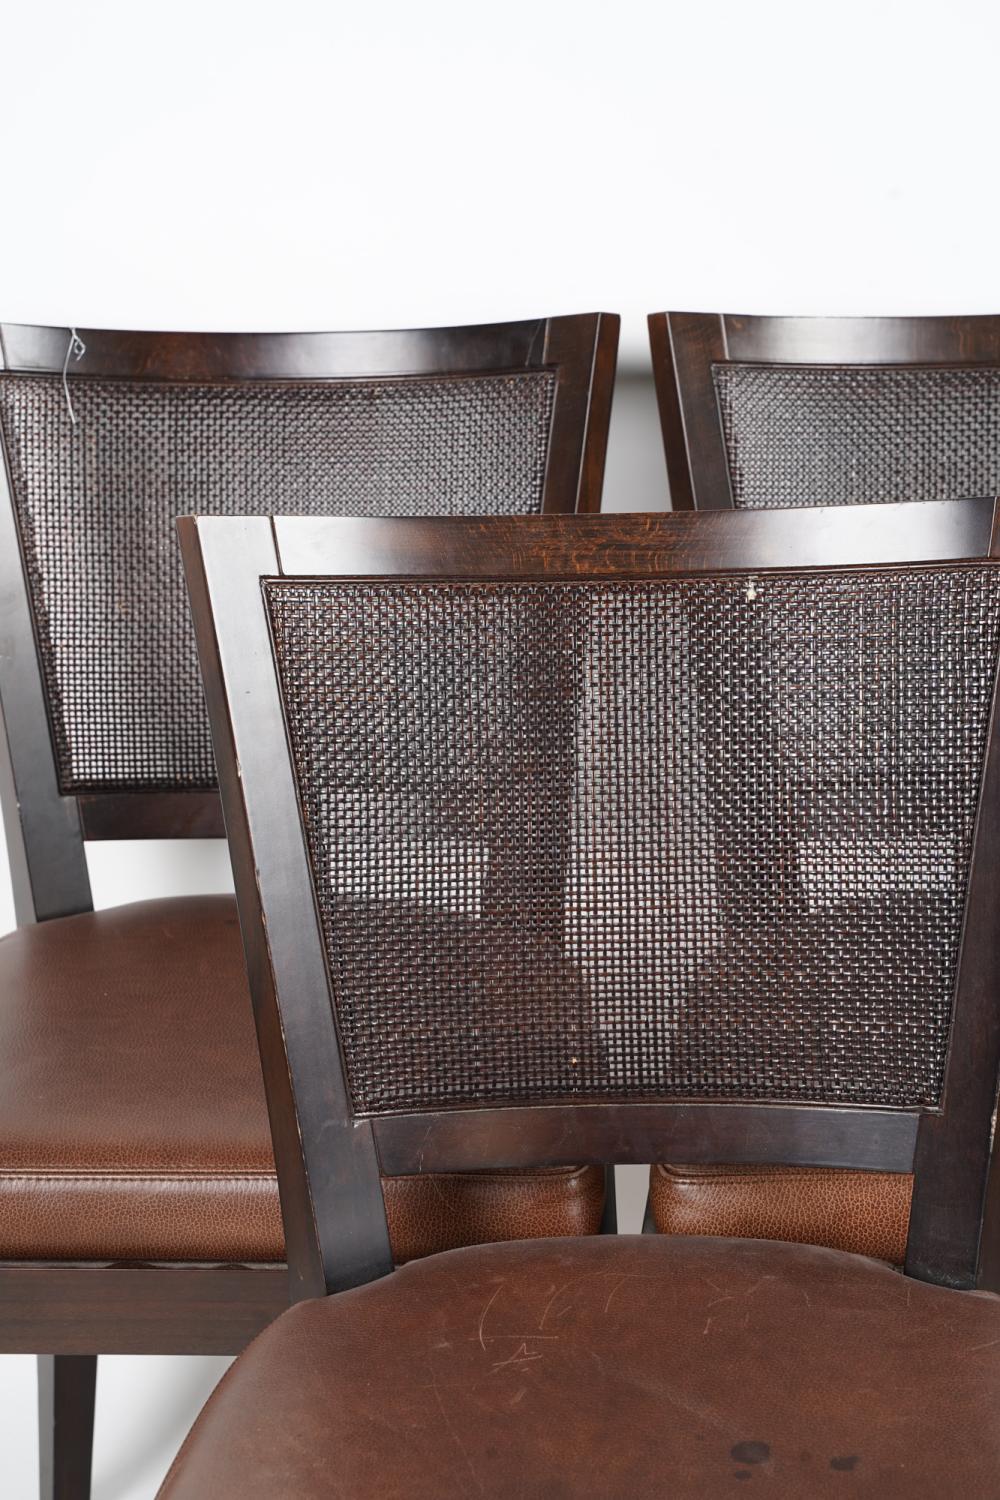 Moderne Set Six Promemoria Caffe Caned Leather Dining Chairs Contemporary Italian C 2000 en vente